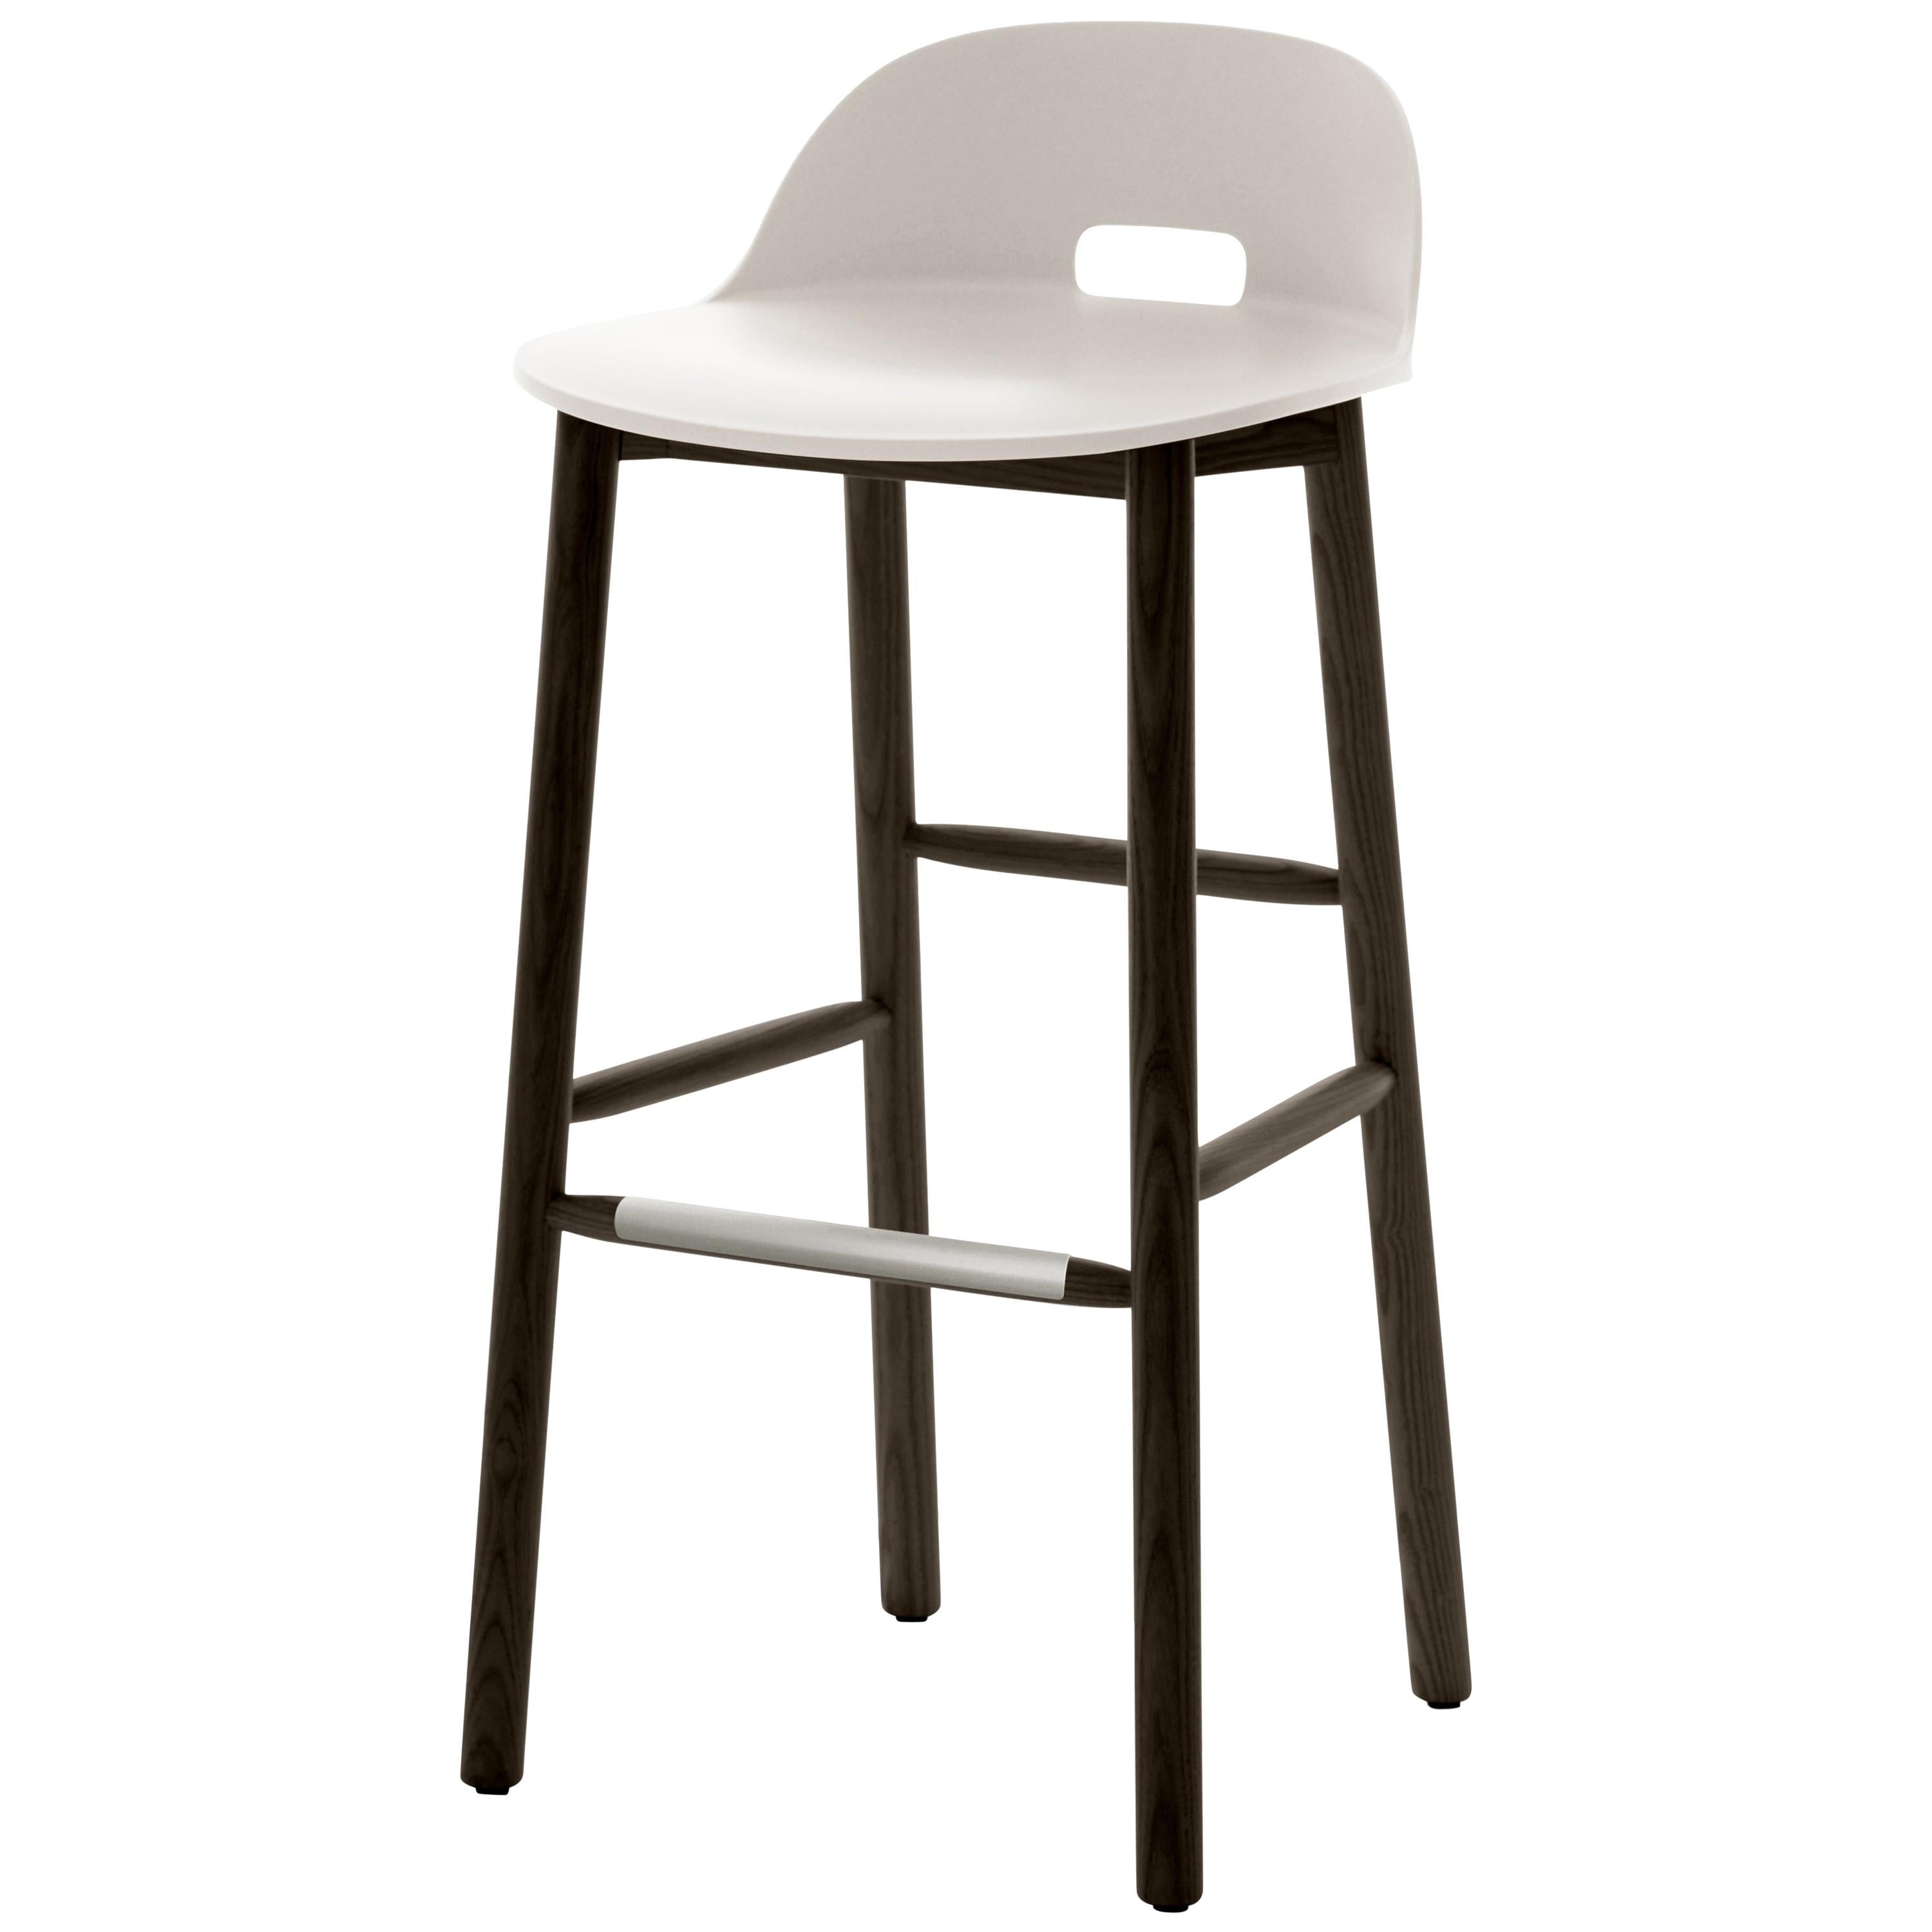 Emeco Alfi Barstool in White and Dark Ash with Low Back by Jasper Morrison